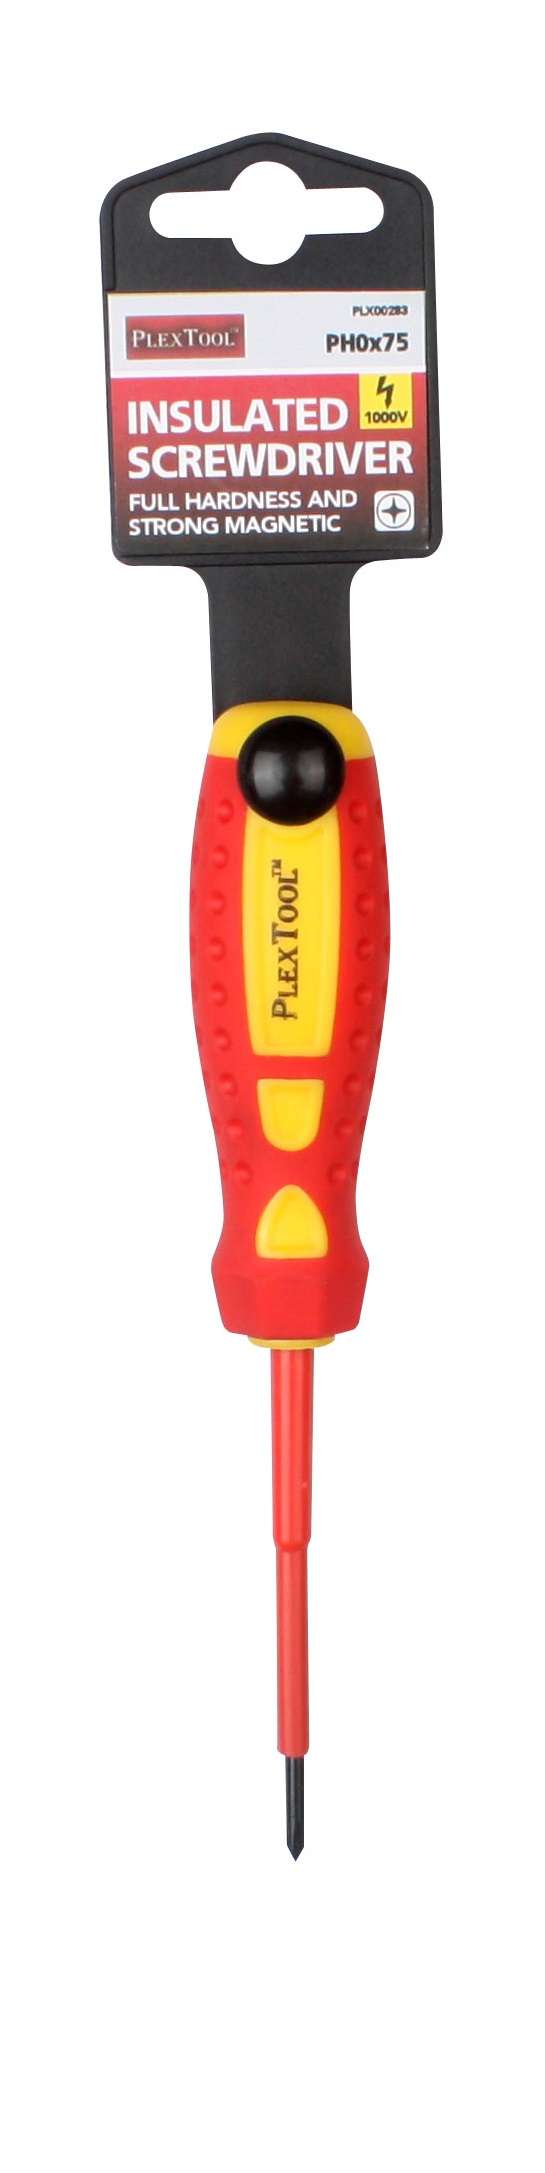 3"L x PH0 Full Hardness Strong Magnetic Insulated Screwdriver - 1